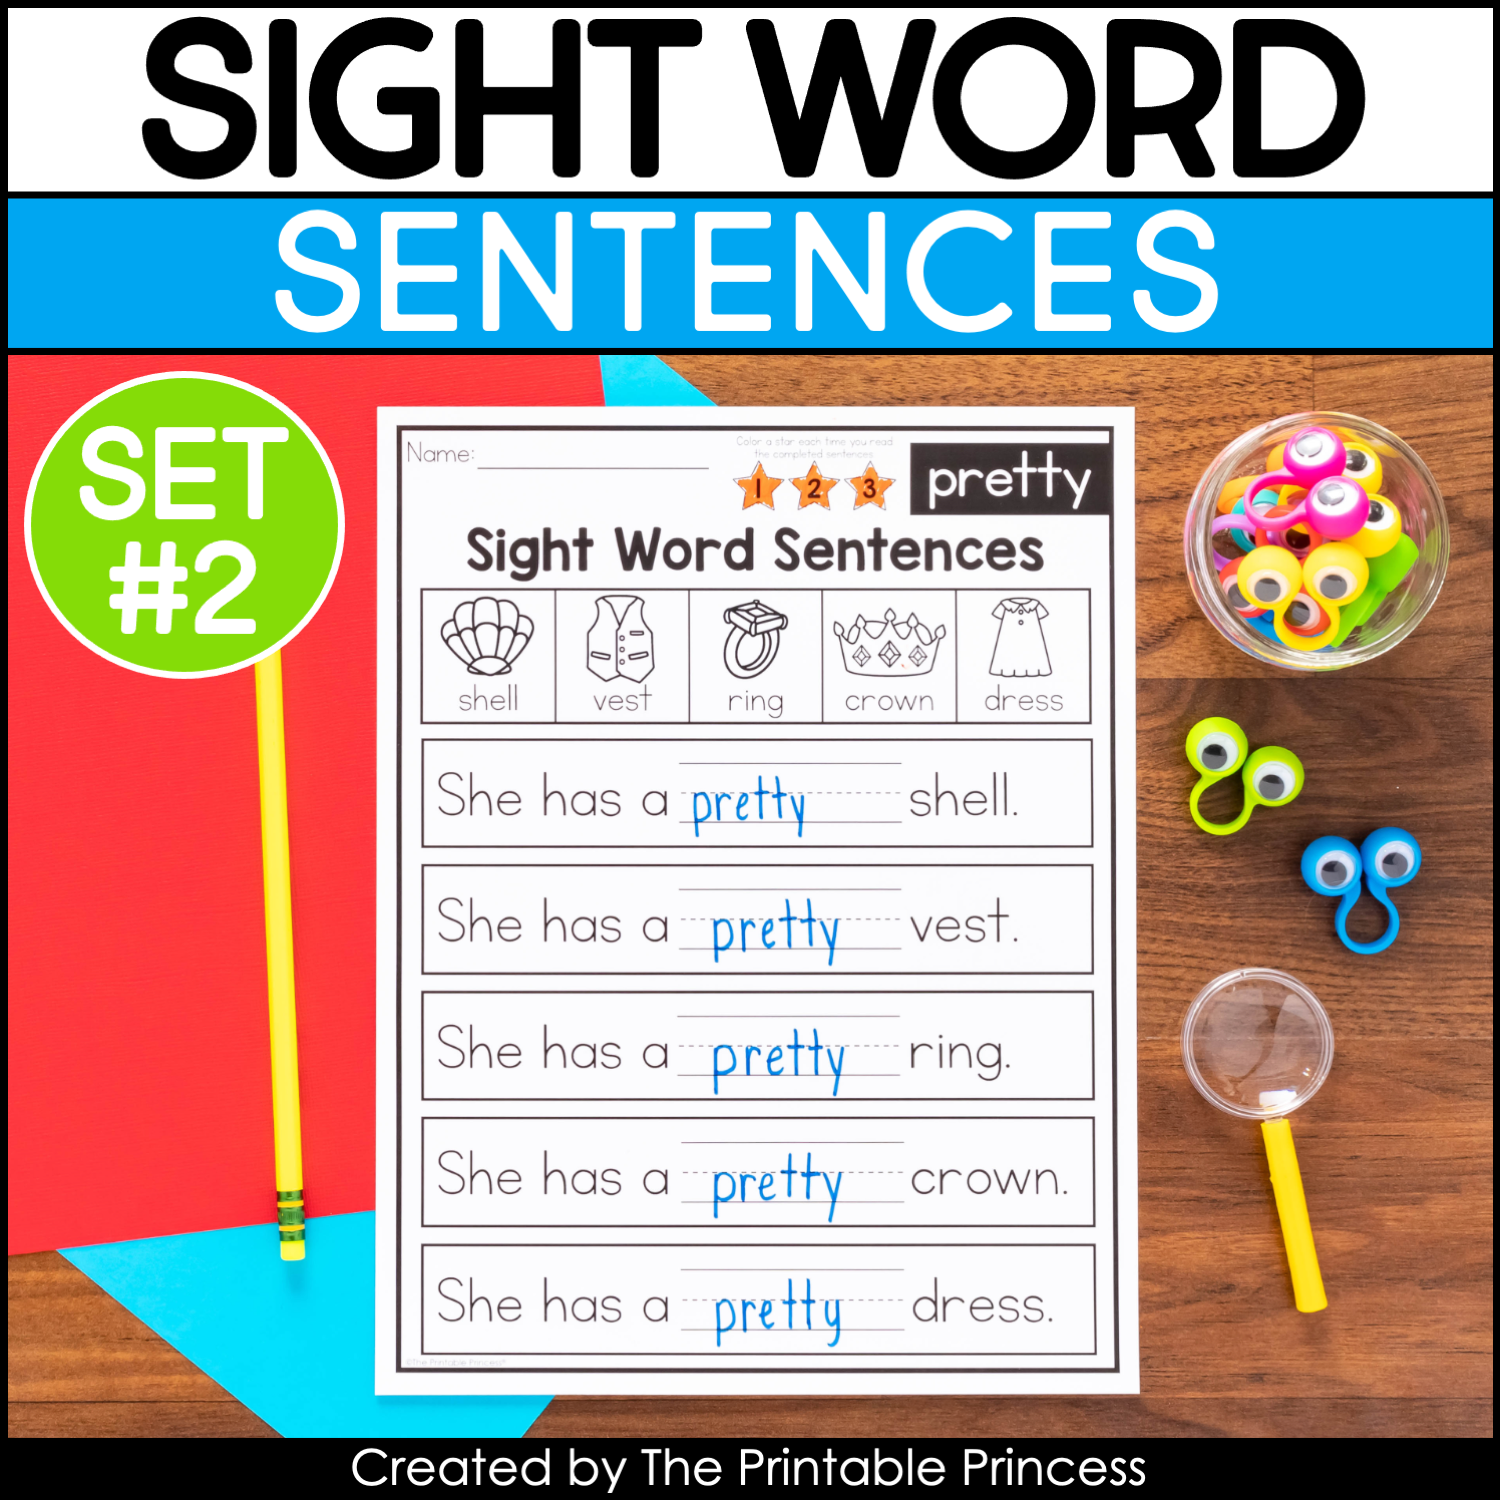 fill-in-the-blank-sight-word-sentences-set-2-the-printable-princess